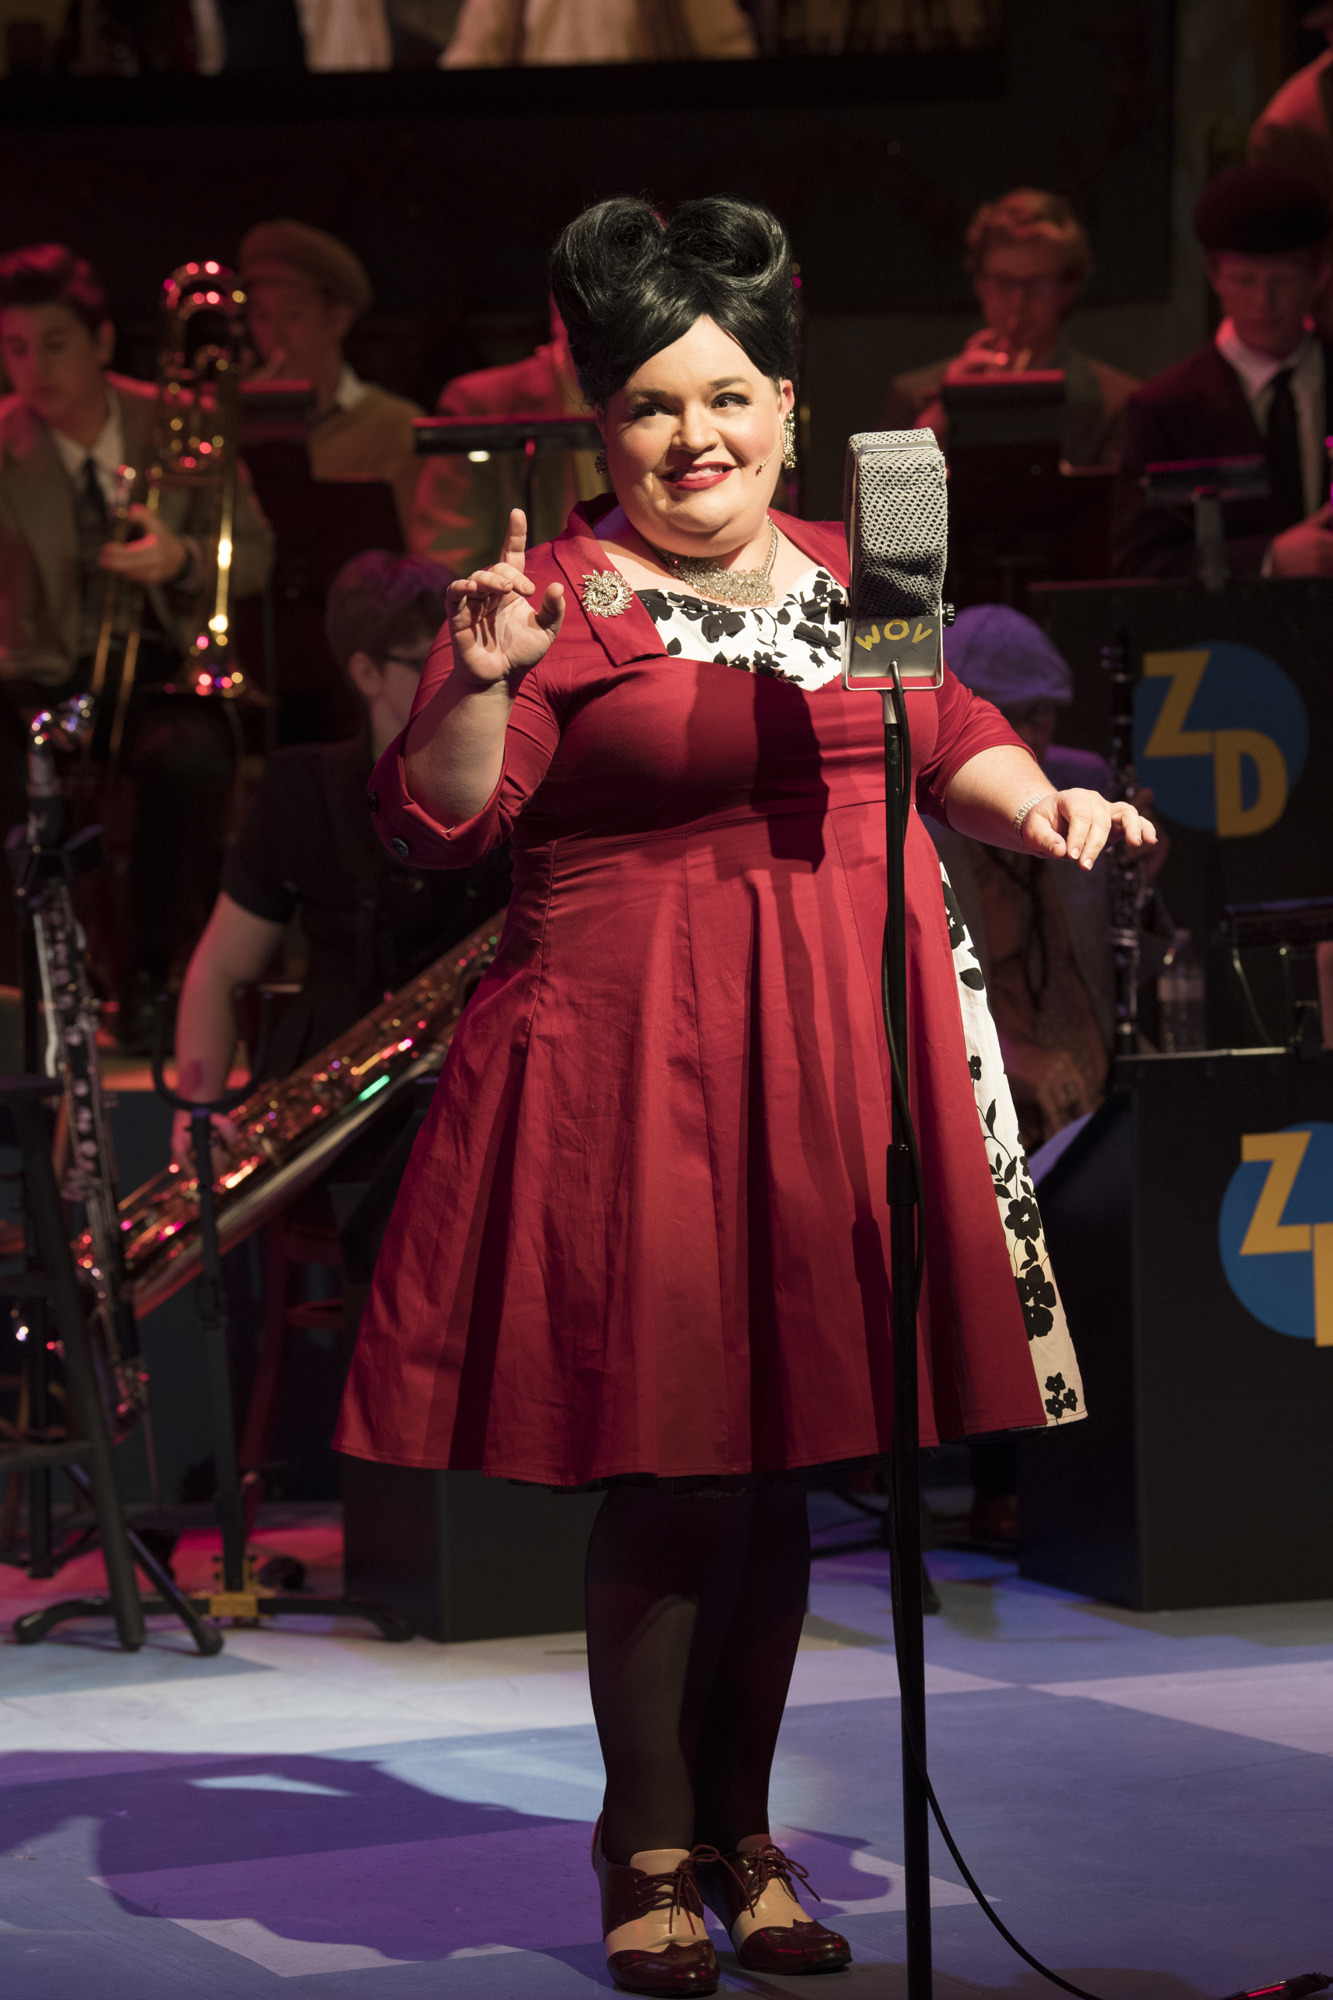 Debbi White performs a scene in “The 1940’s Radio Hour” at Players Mainstage. Photo by Cliff Roles